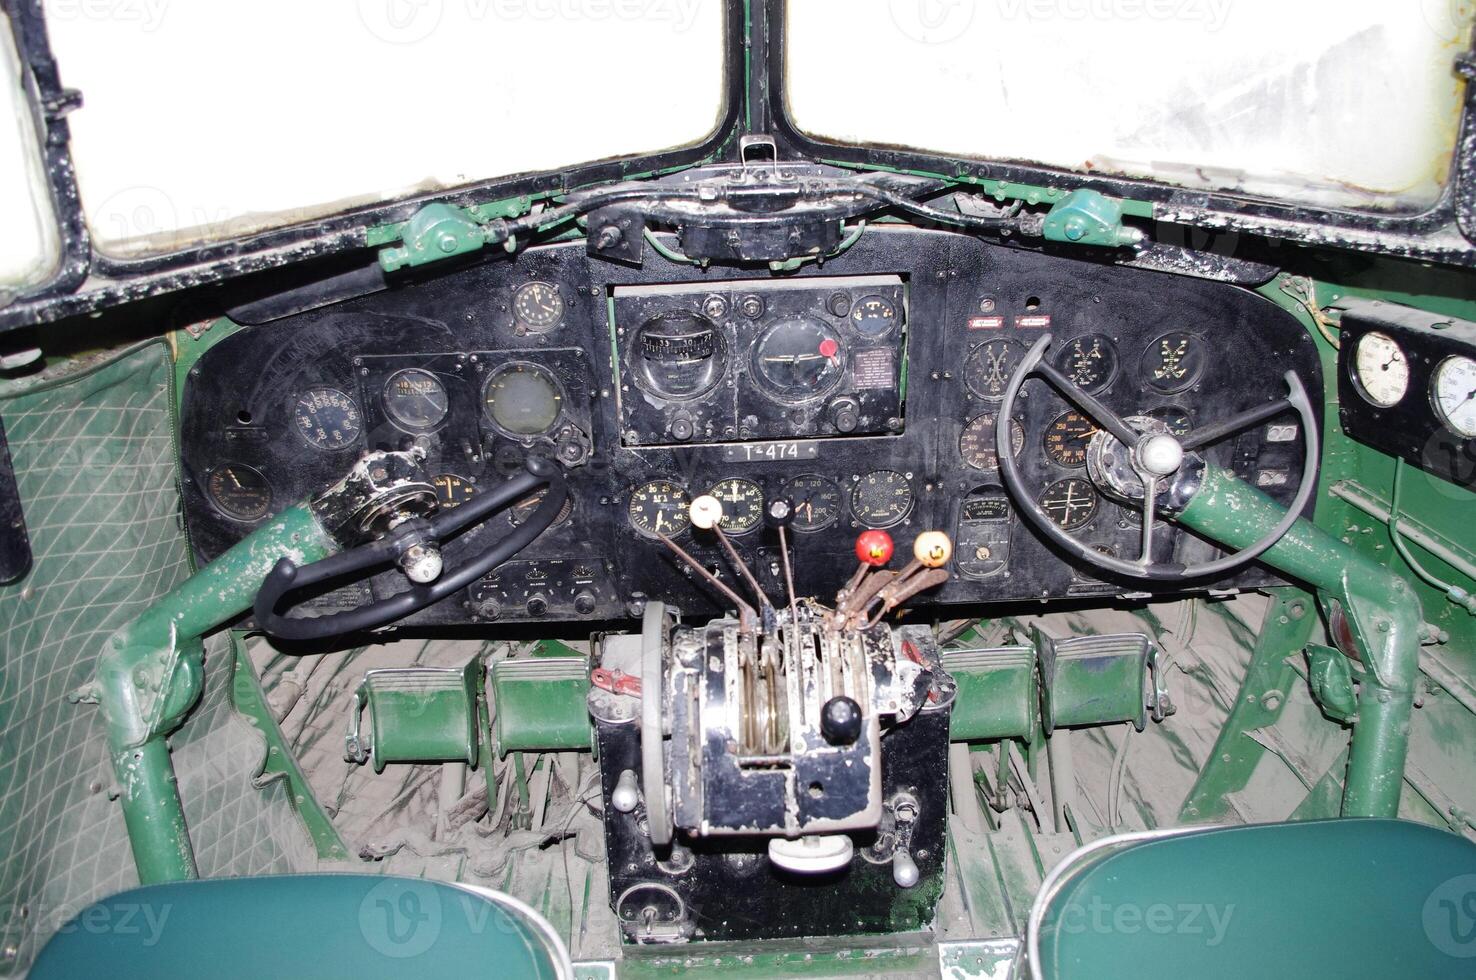 In the cockpit of an old aeroplane photo